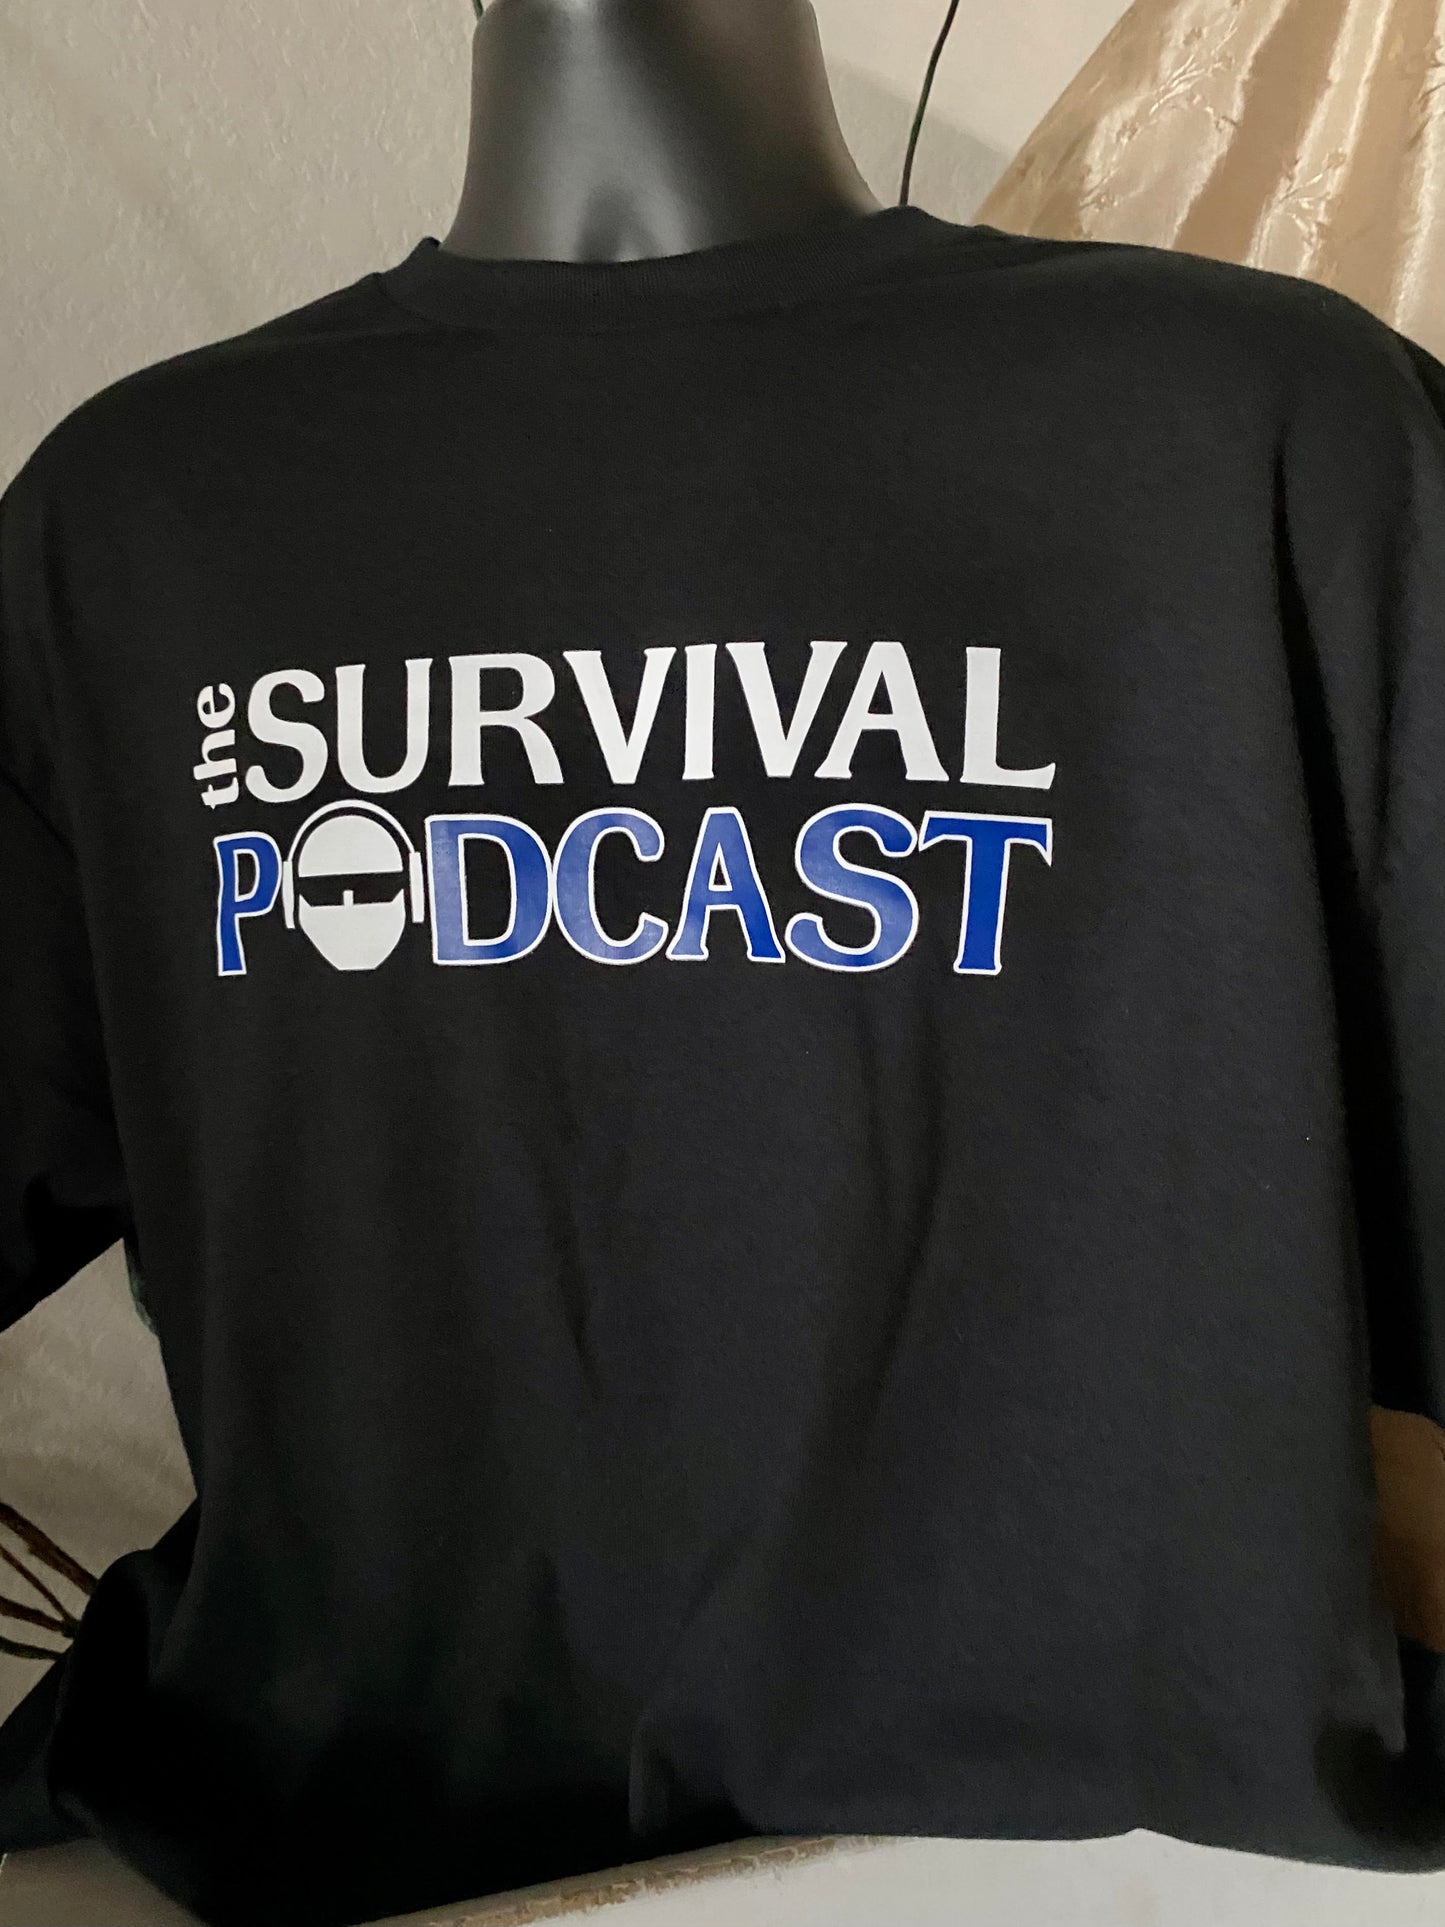 The Survival Podcast Title Large Logo Tee Shirt